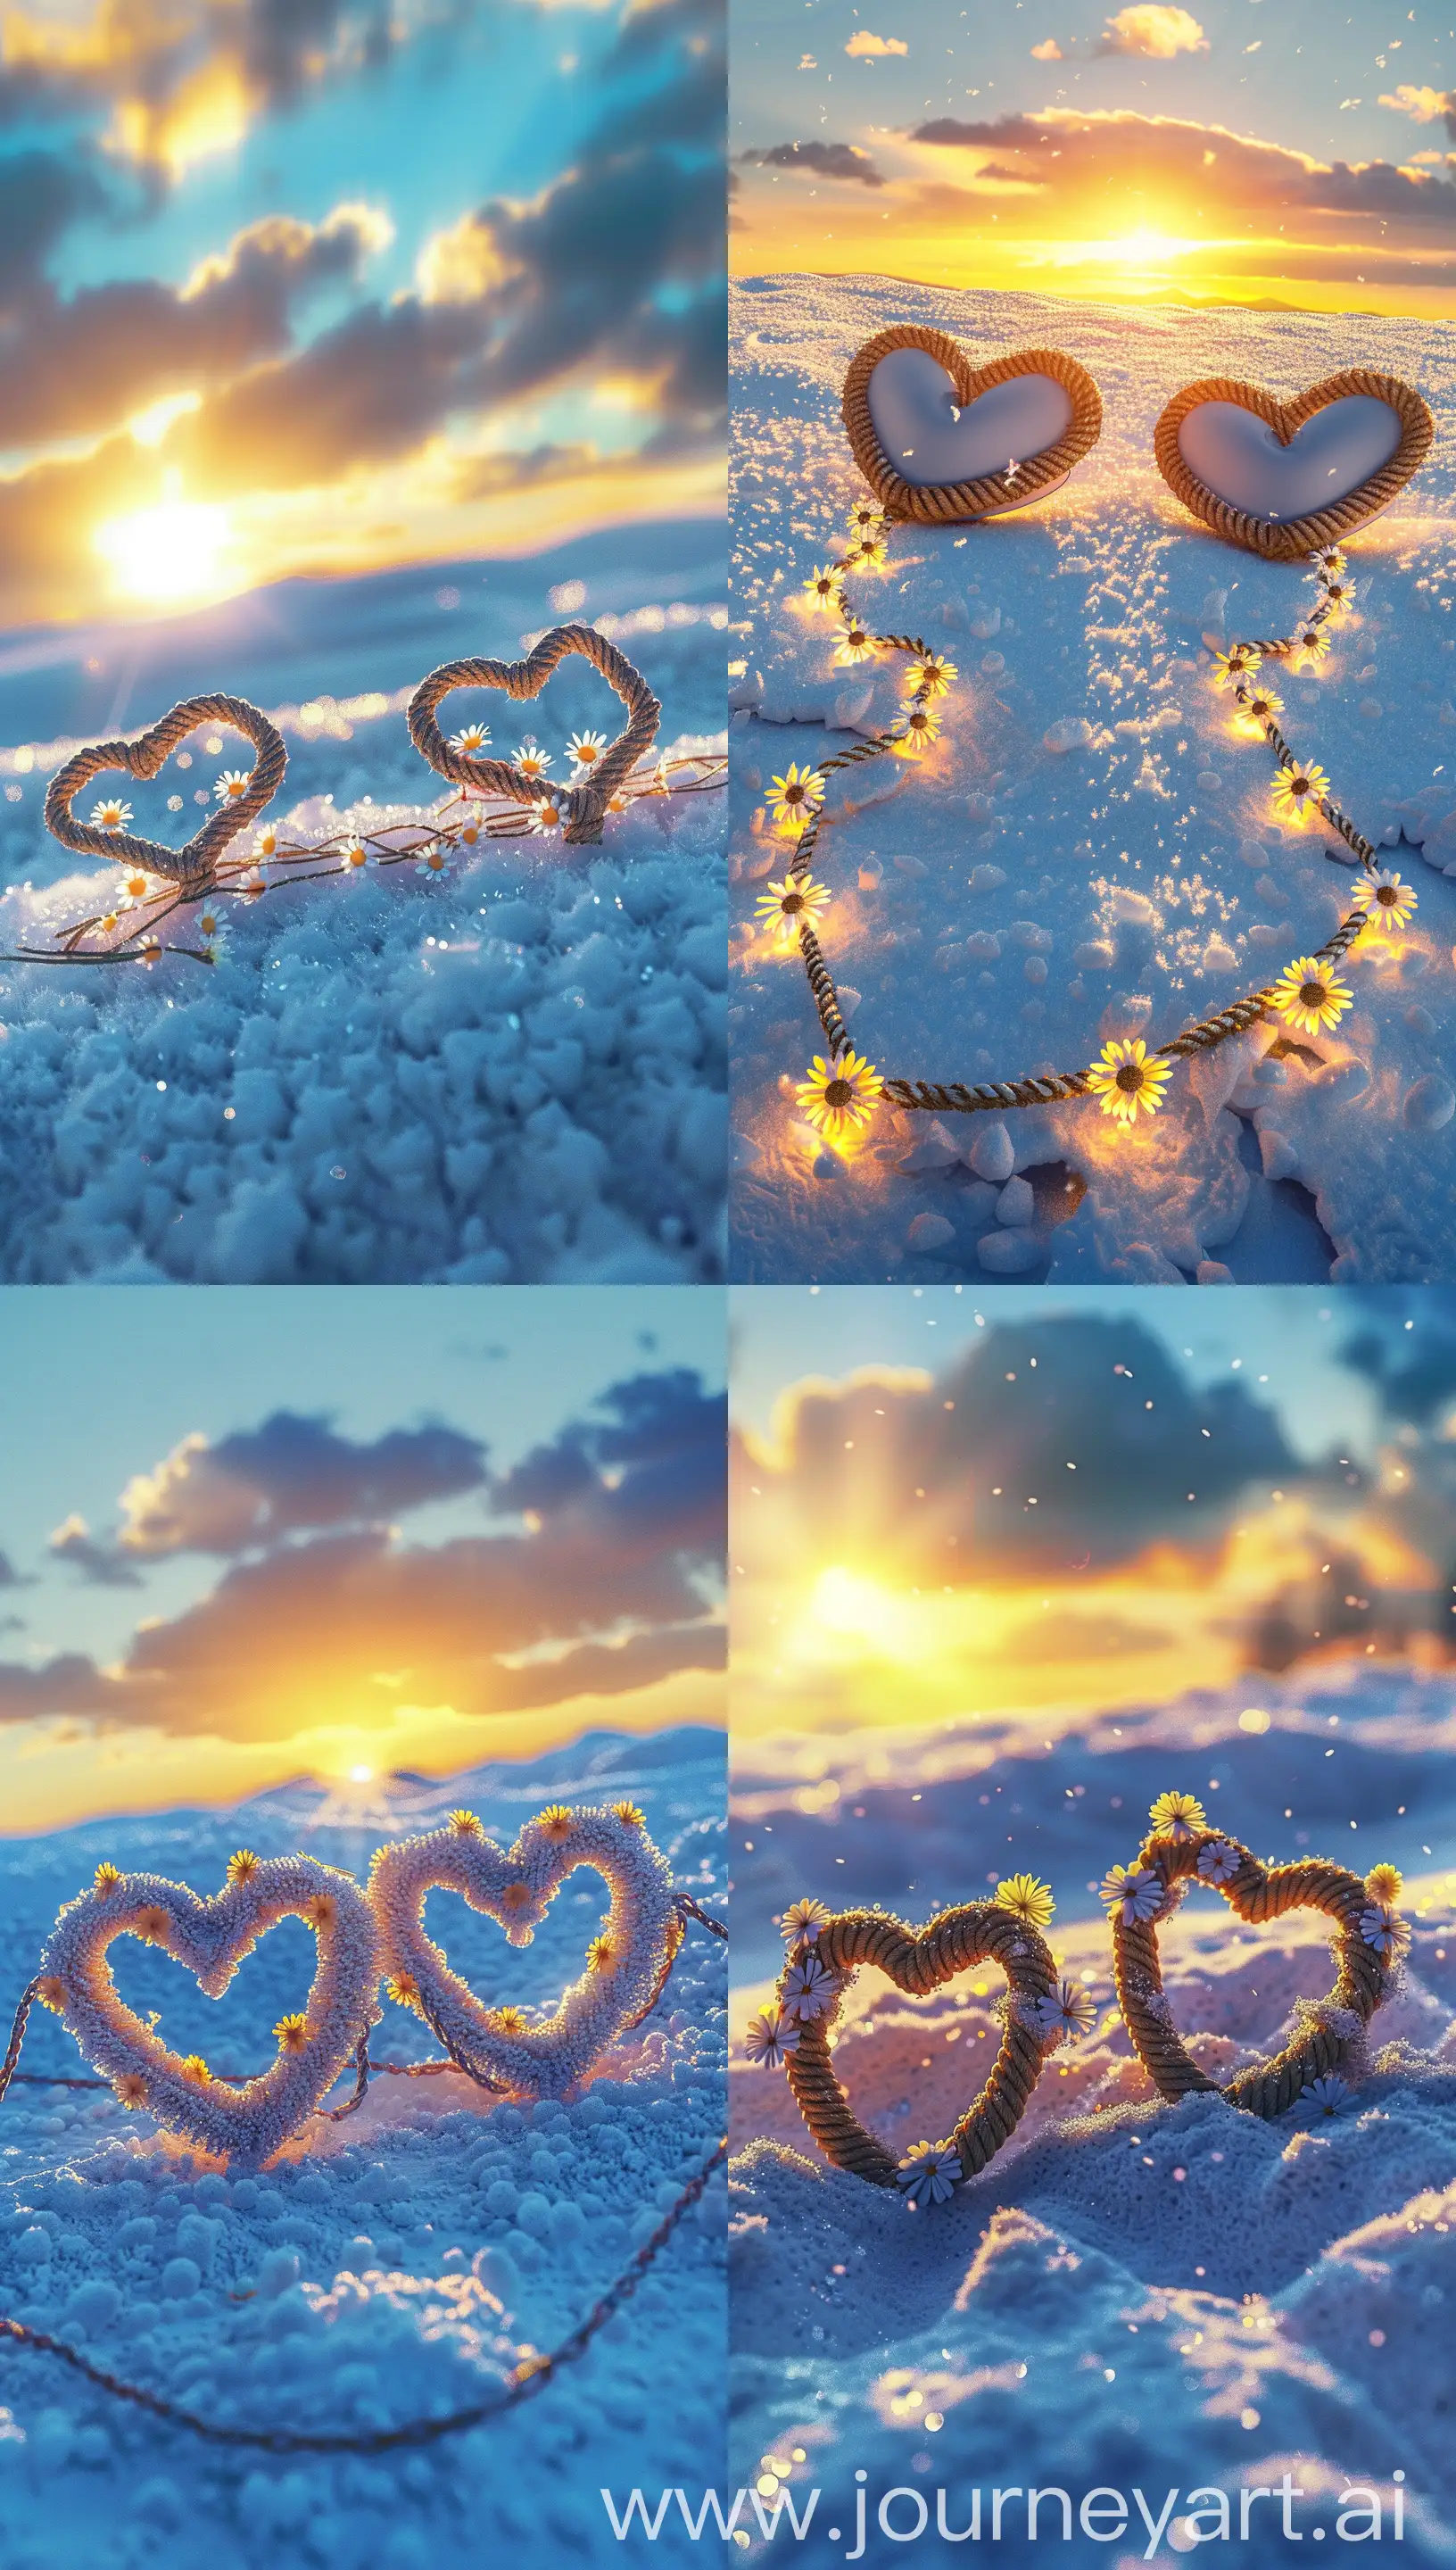 Romantic-Snow-Scene-Sunset-Sky-with-HeartShaped-Daisy-Garlands